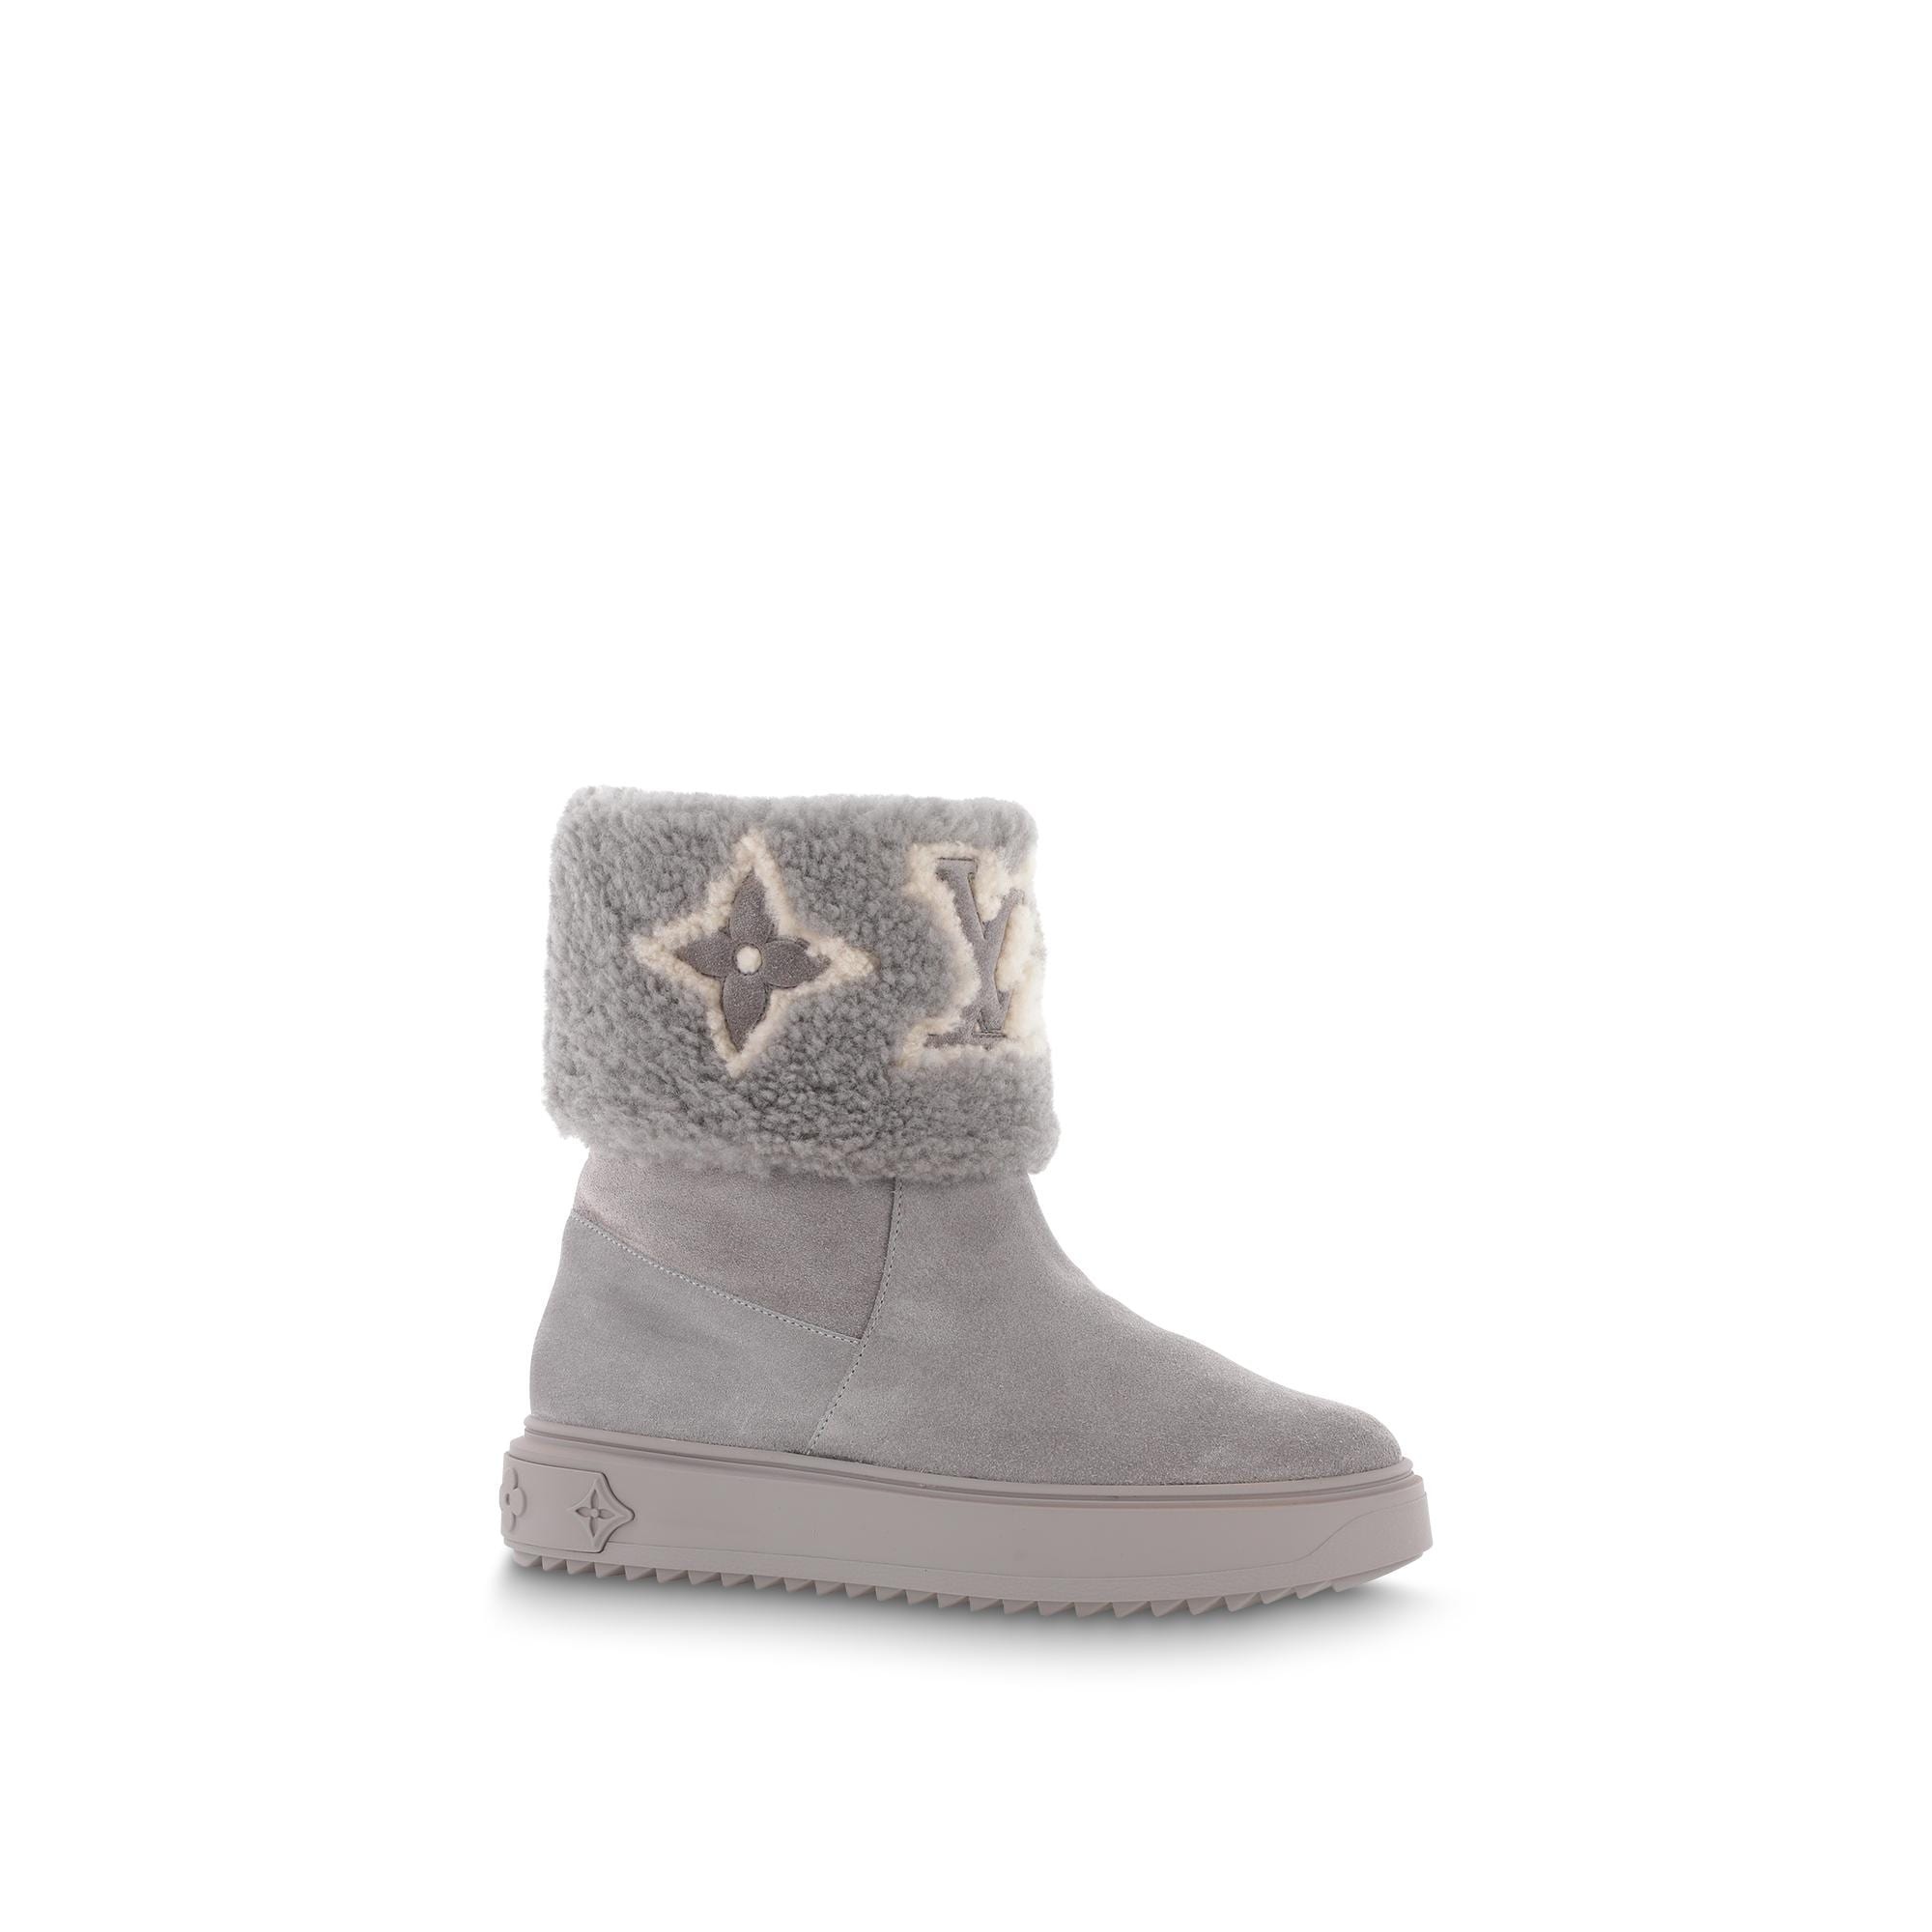 Snowdrop Flat Ankle Boot - 1